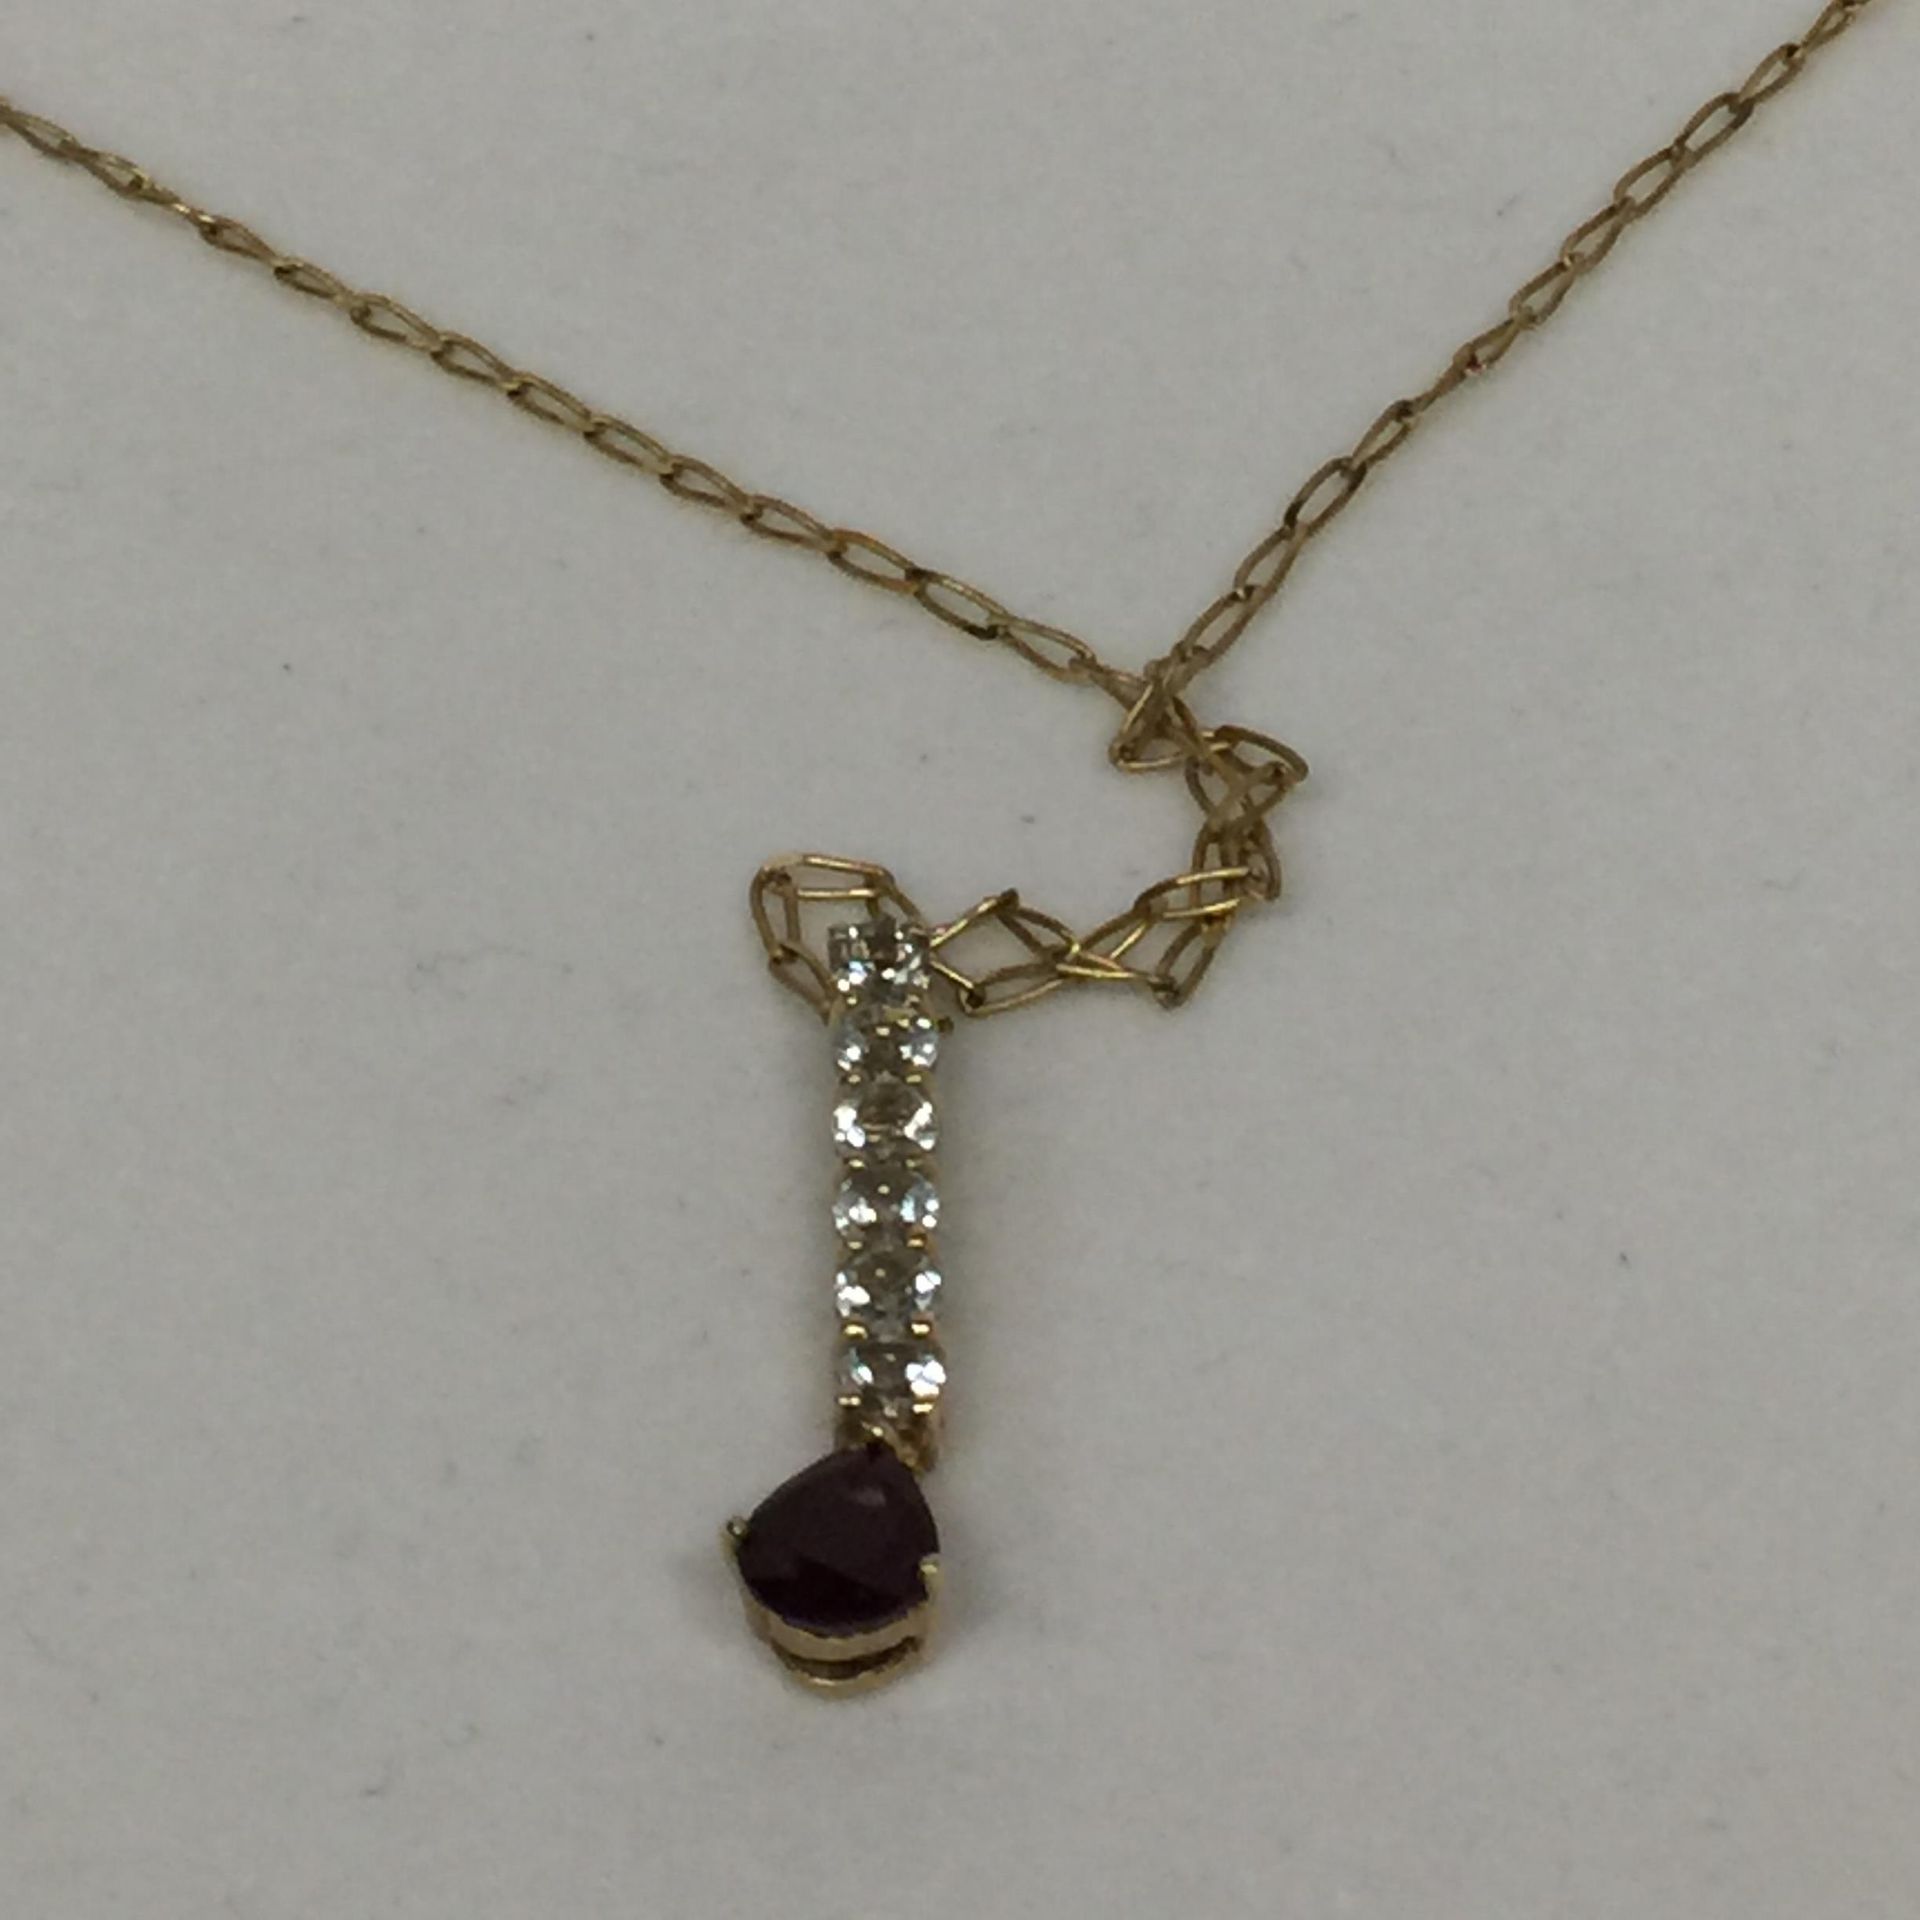 A 9 CARAT GOLD NECKLACE AND PENDANT WITH GARNETS AND CUBIC ZIRCONIAS - Image 2 of 2